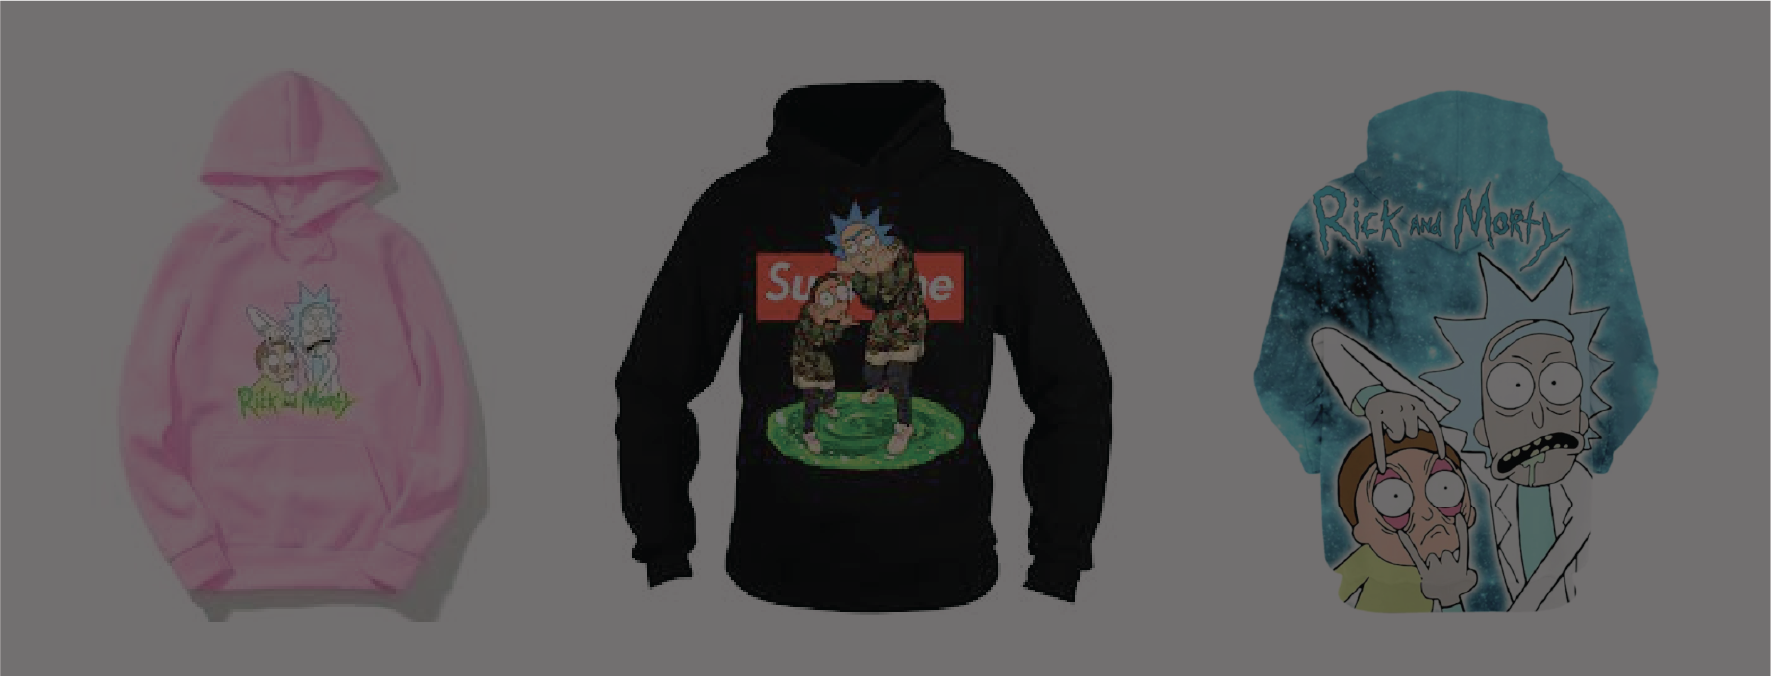 rick and morty hoodie banner